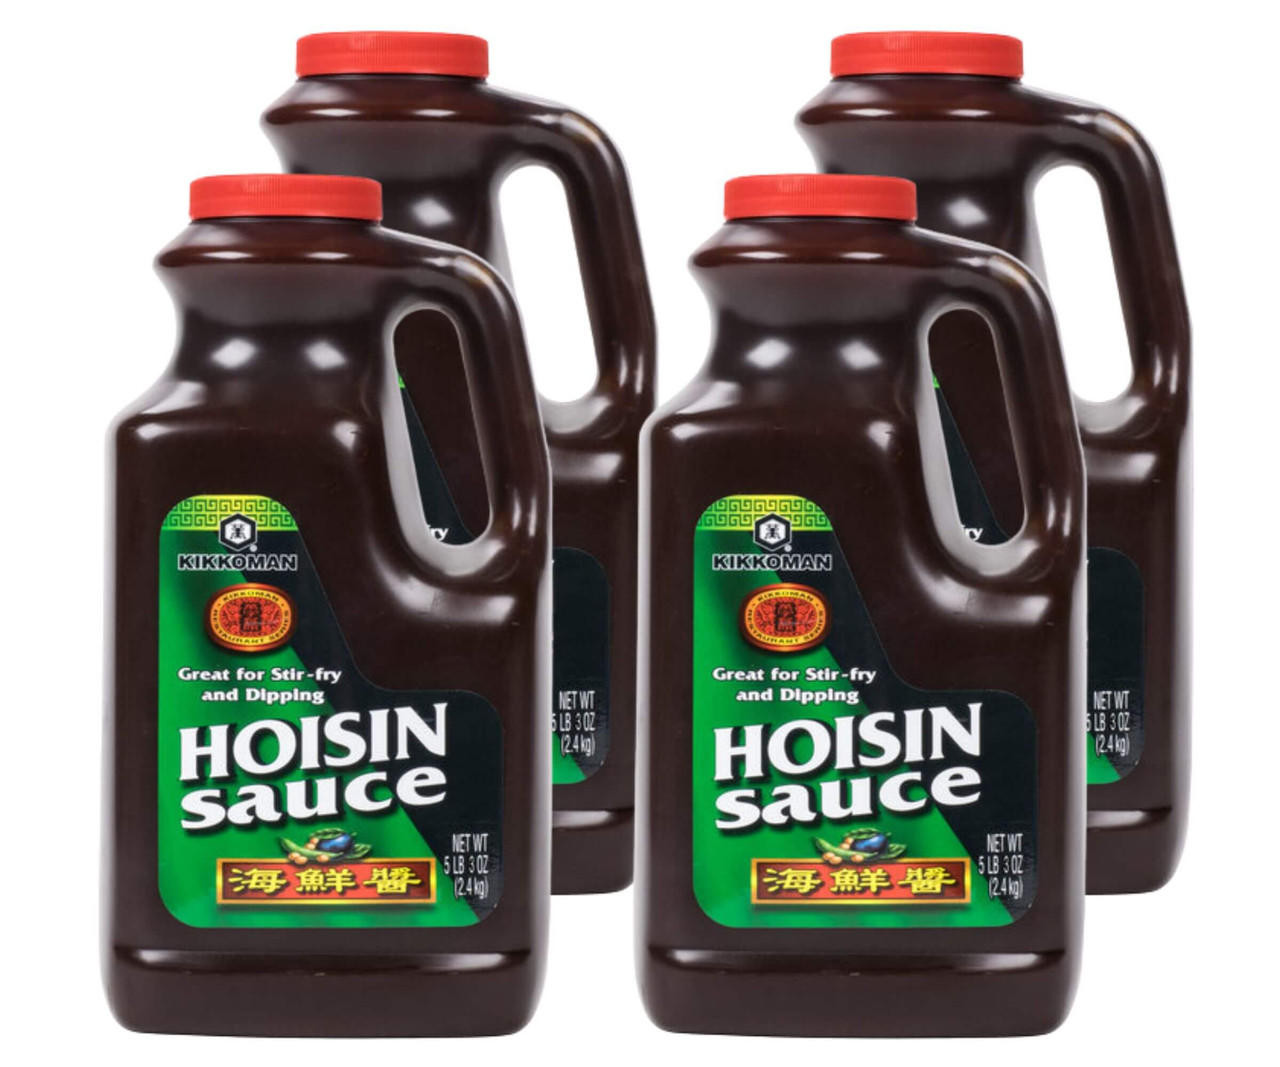 KIKKOMAN Kikkoman Hoisin Sauce 5 lb. Container - 4/Case - Elevate Your Dishes with Rich and Flavorful Hoisin Sauce 